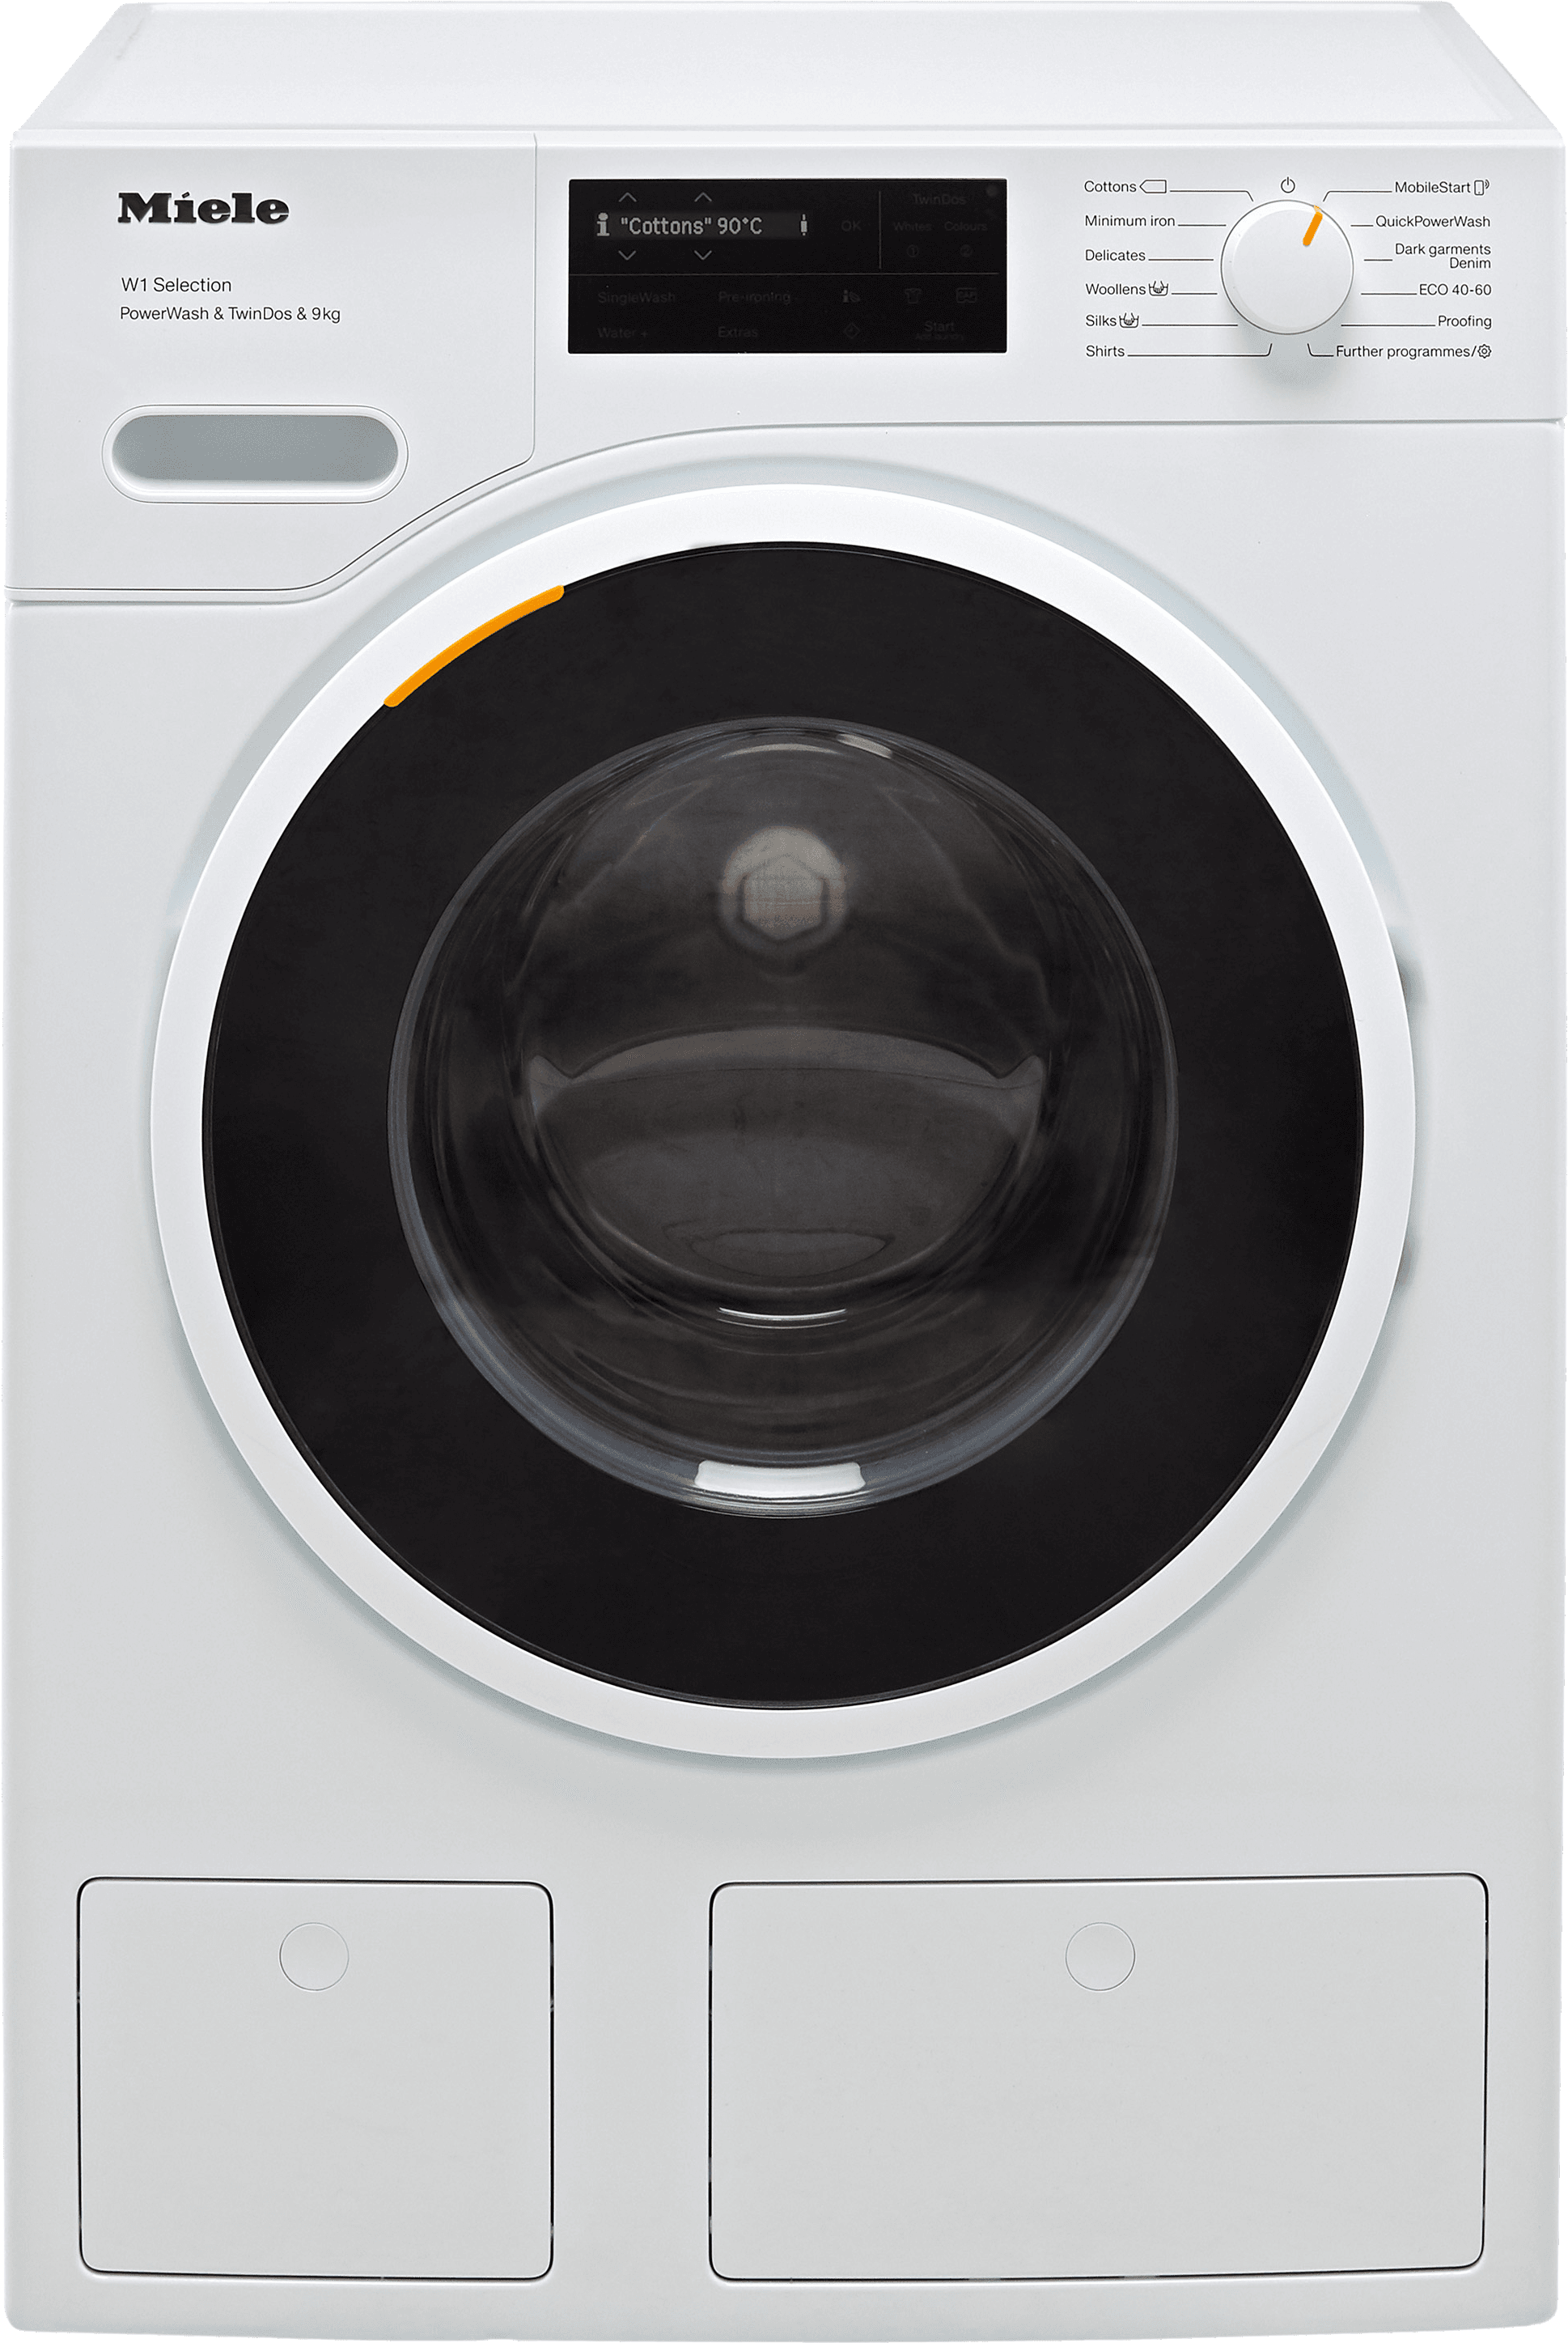 Miele W1 WSI863 9kg Washing Machine with 1600 rpm - White - A Rated White